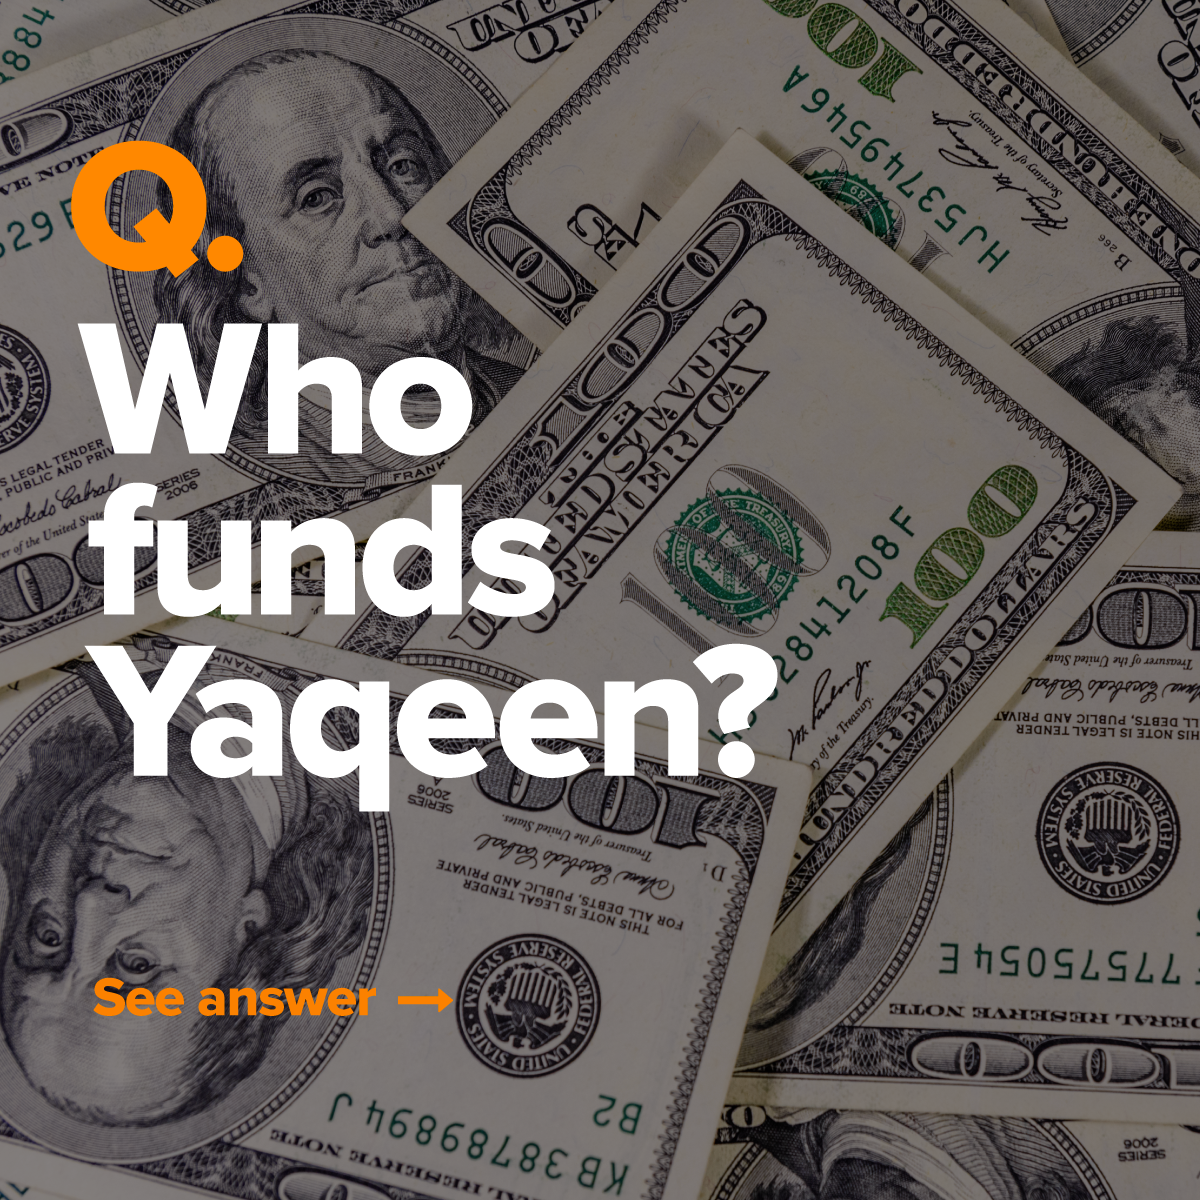 Question 4: Who funds Yaqeen?